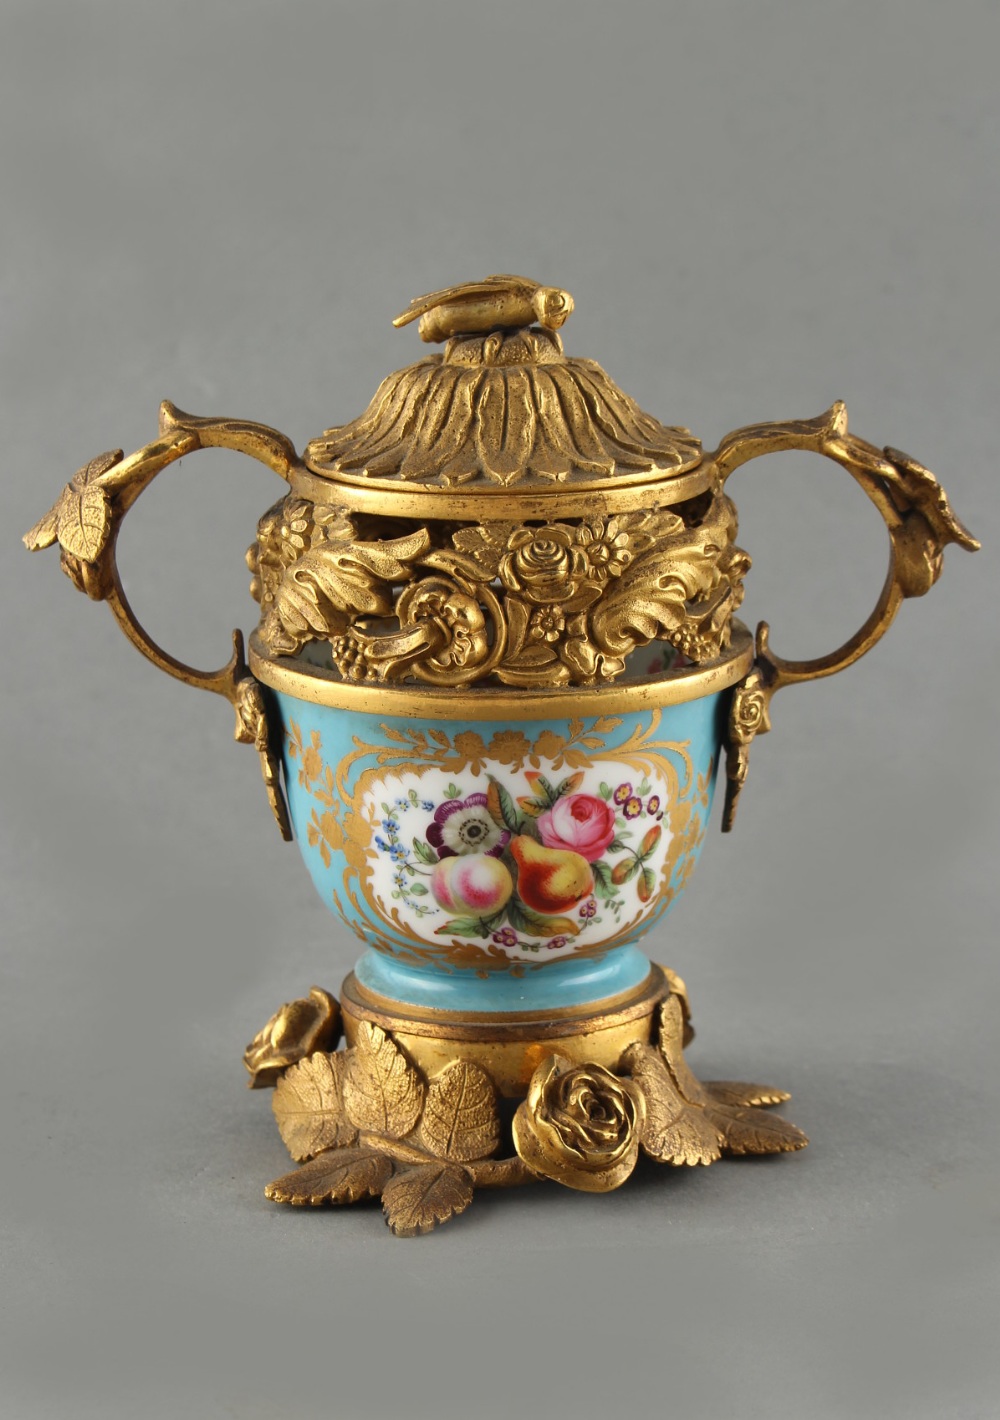 Property of a deceased estate - a 19th century French ormolu mounted Sevres style porcelain brule